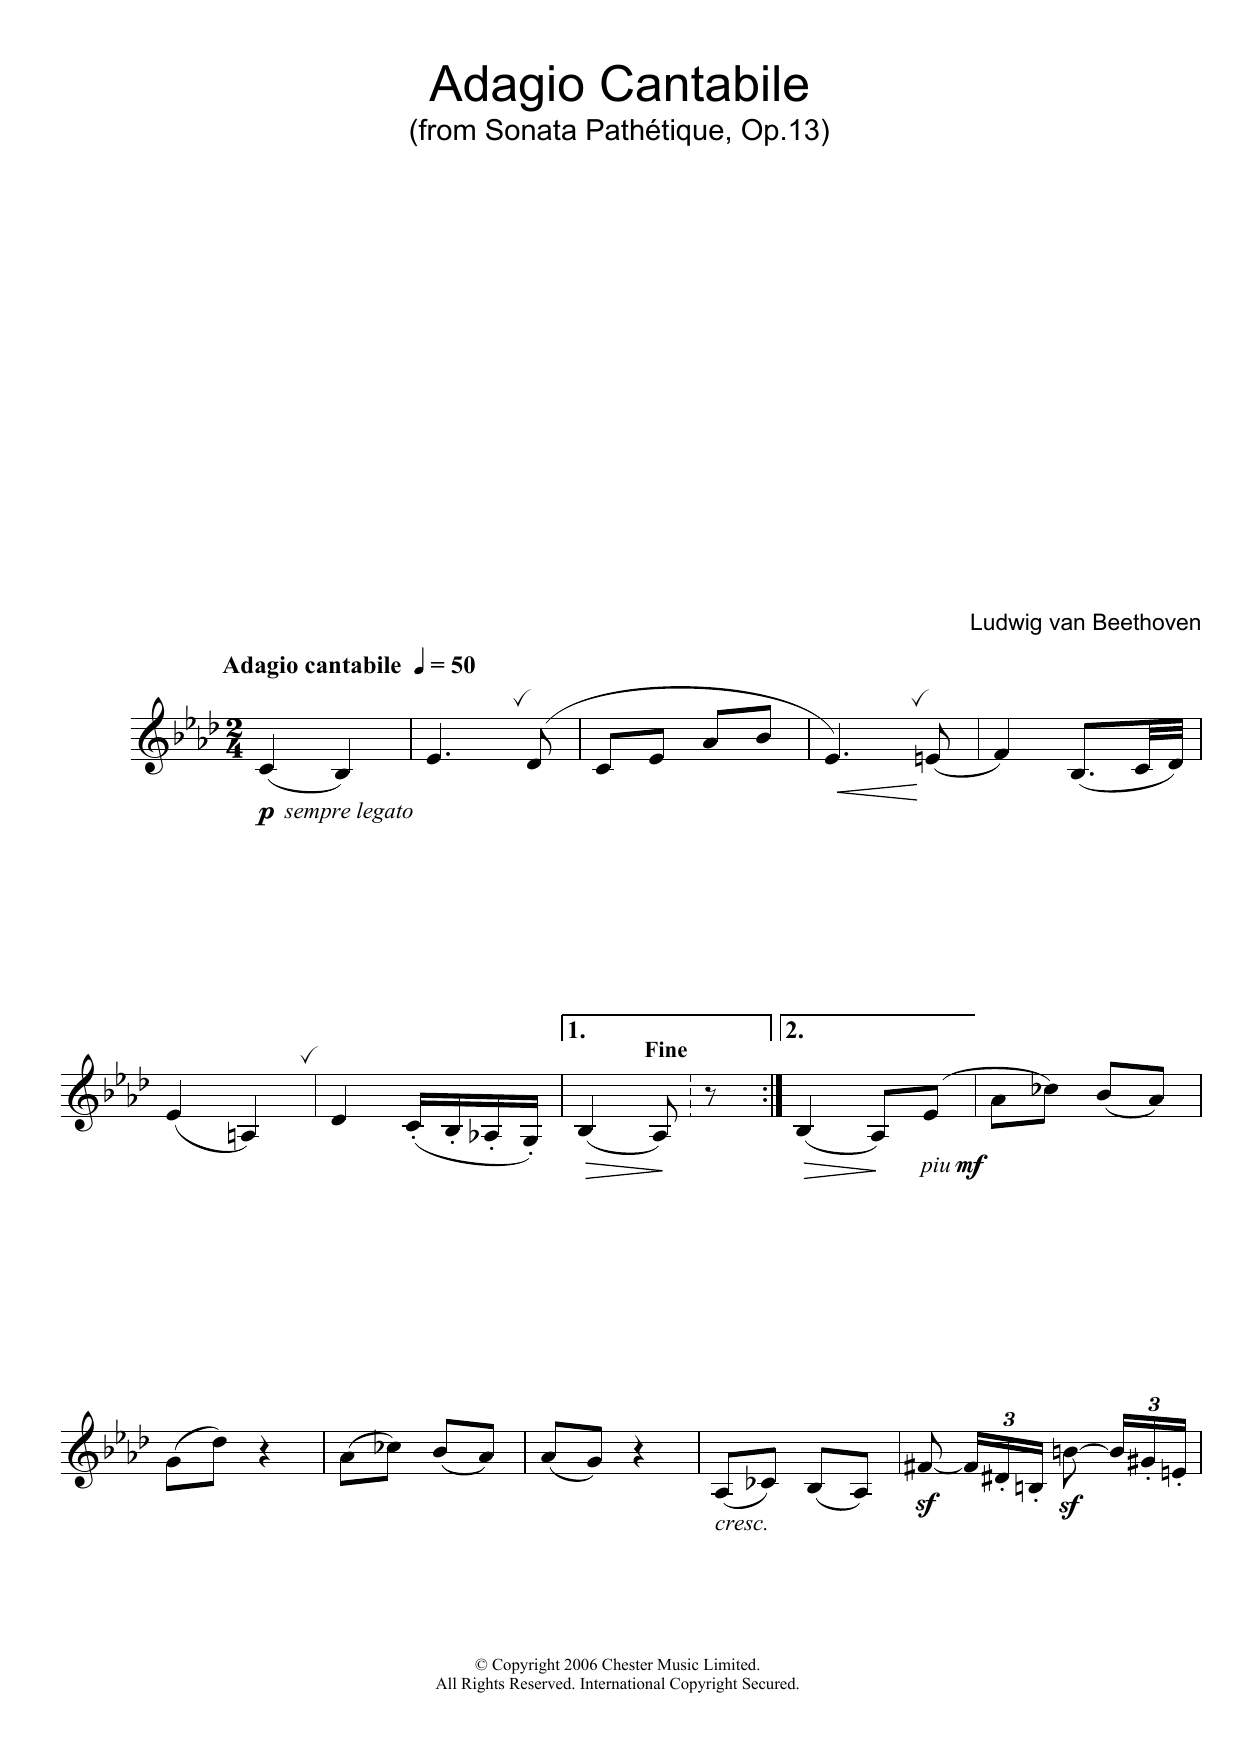 Download Ludwig van Beethoven Adagio Cantabile from Sonate Pathetique Sheet Music